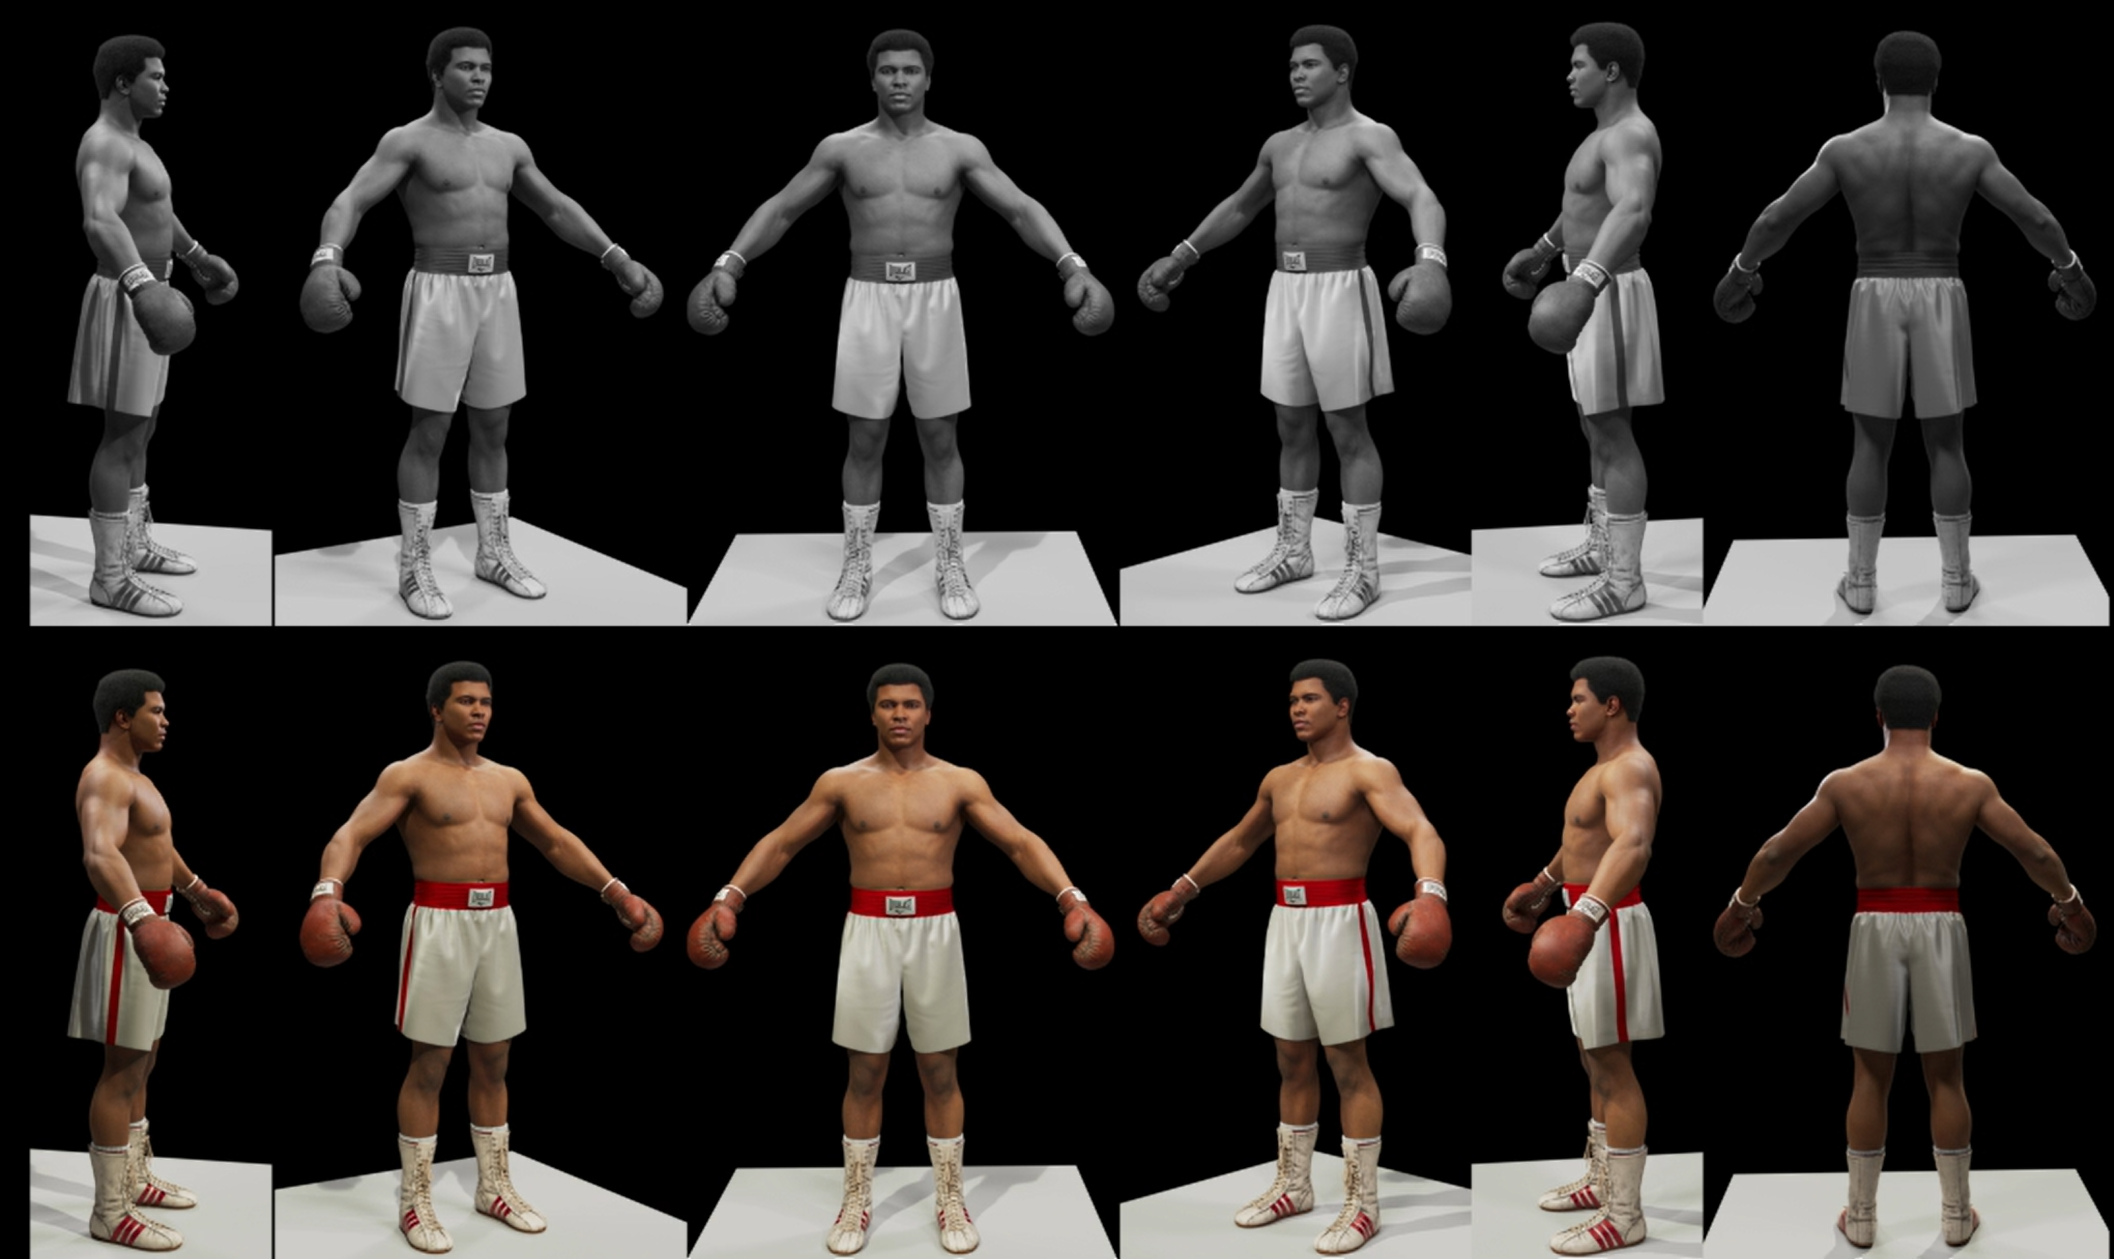 The digital Muhammad Ali created by Chocolate Tribe